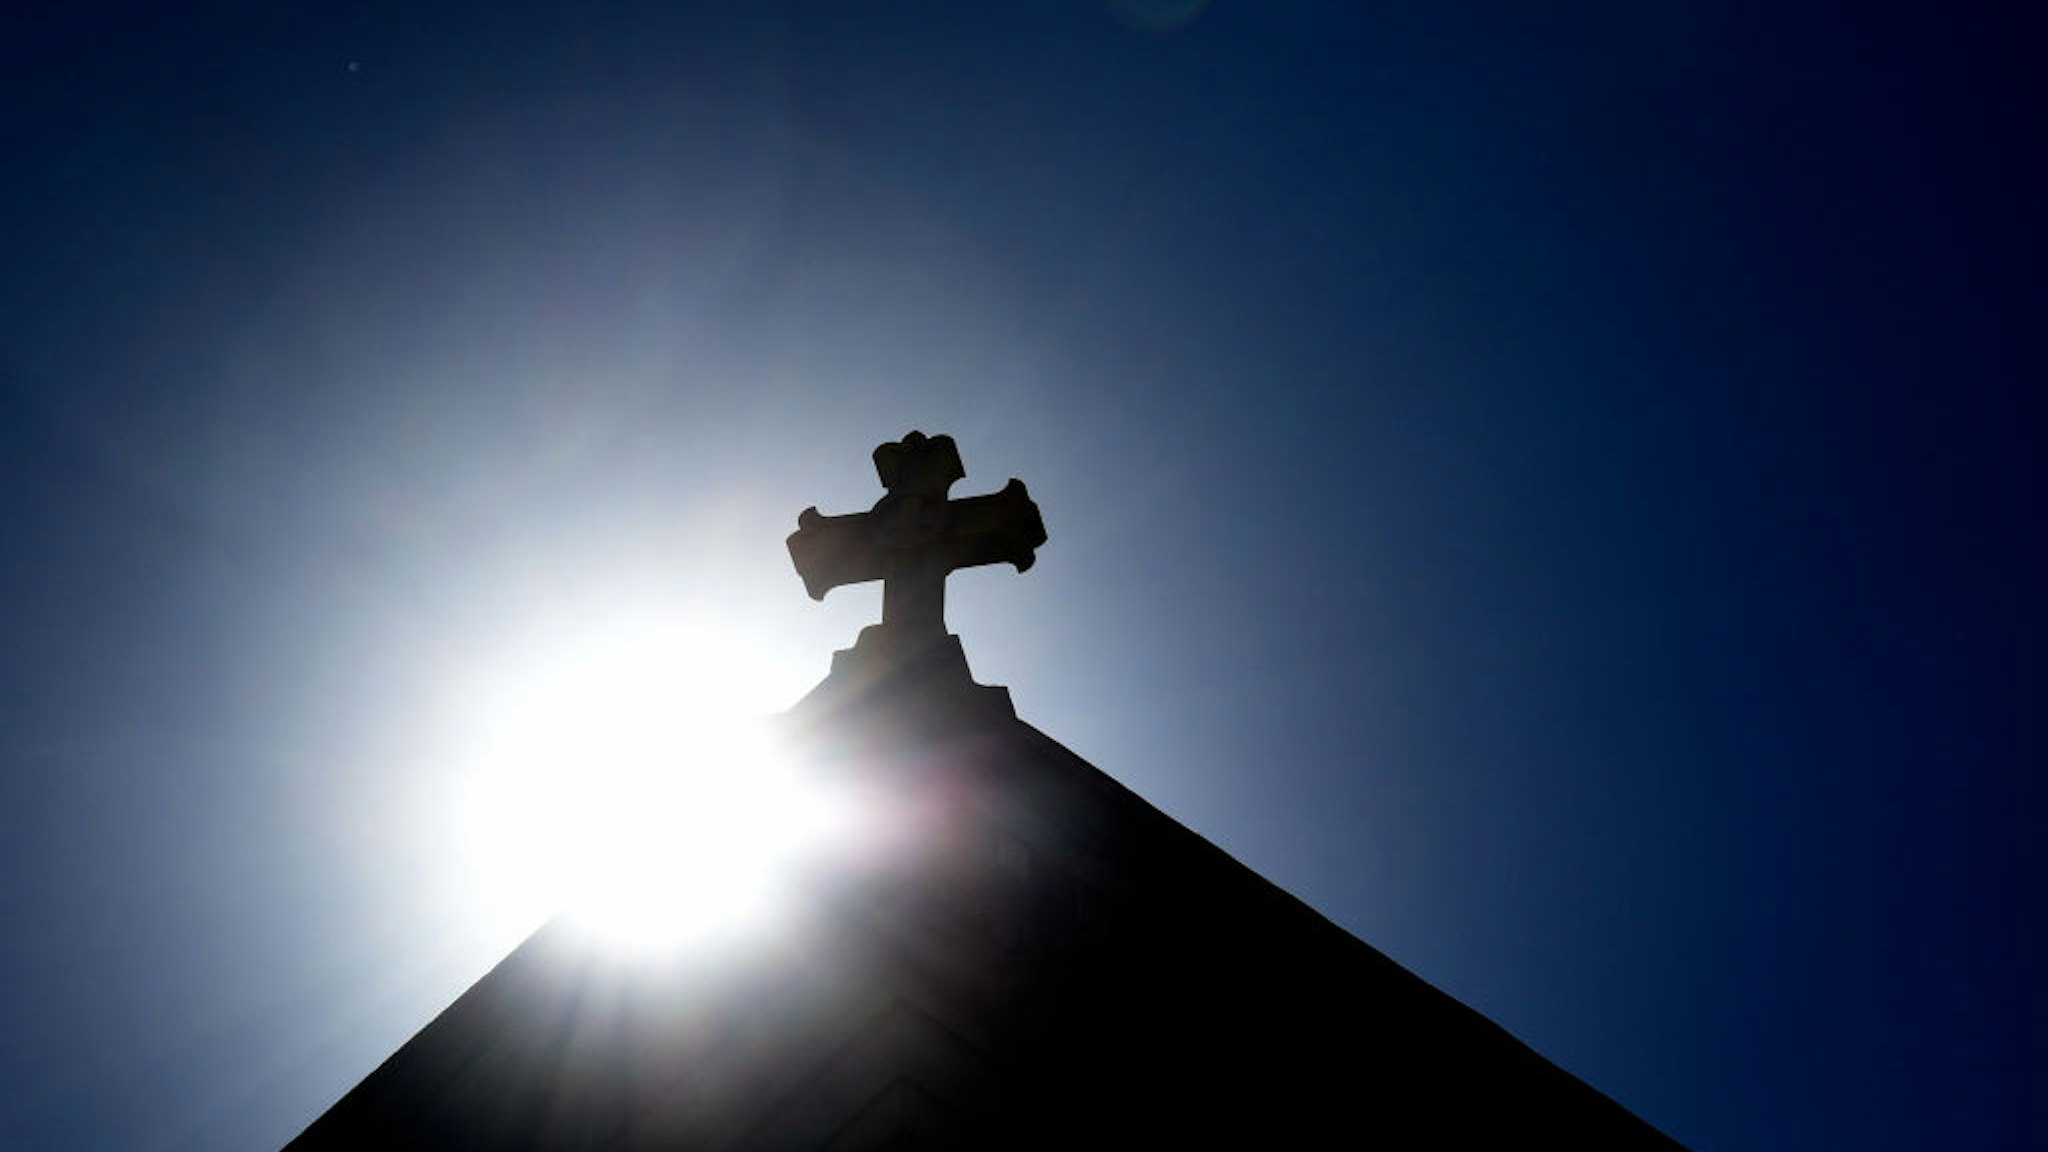 SANTA FE, NEW MEXICO - JUNE 21, 2020: The sun rises behind a stone cross atop the historic Cathedral Basilica of St. Frances of Assisi in Santa Fe, New Mexico.